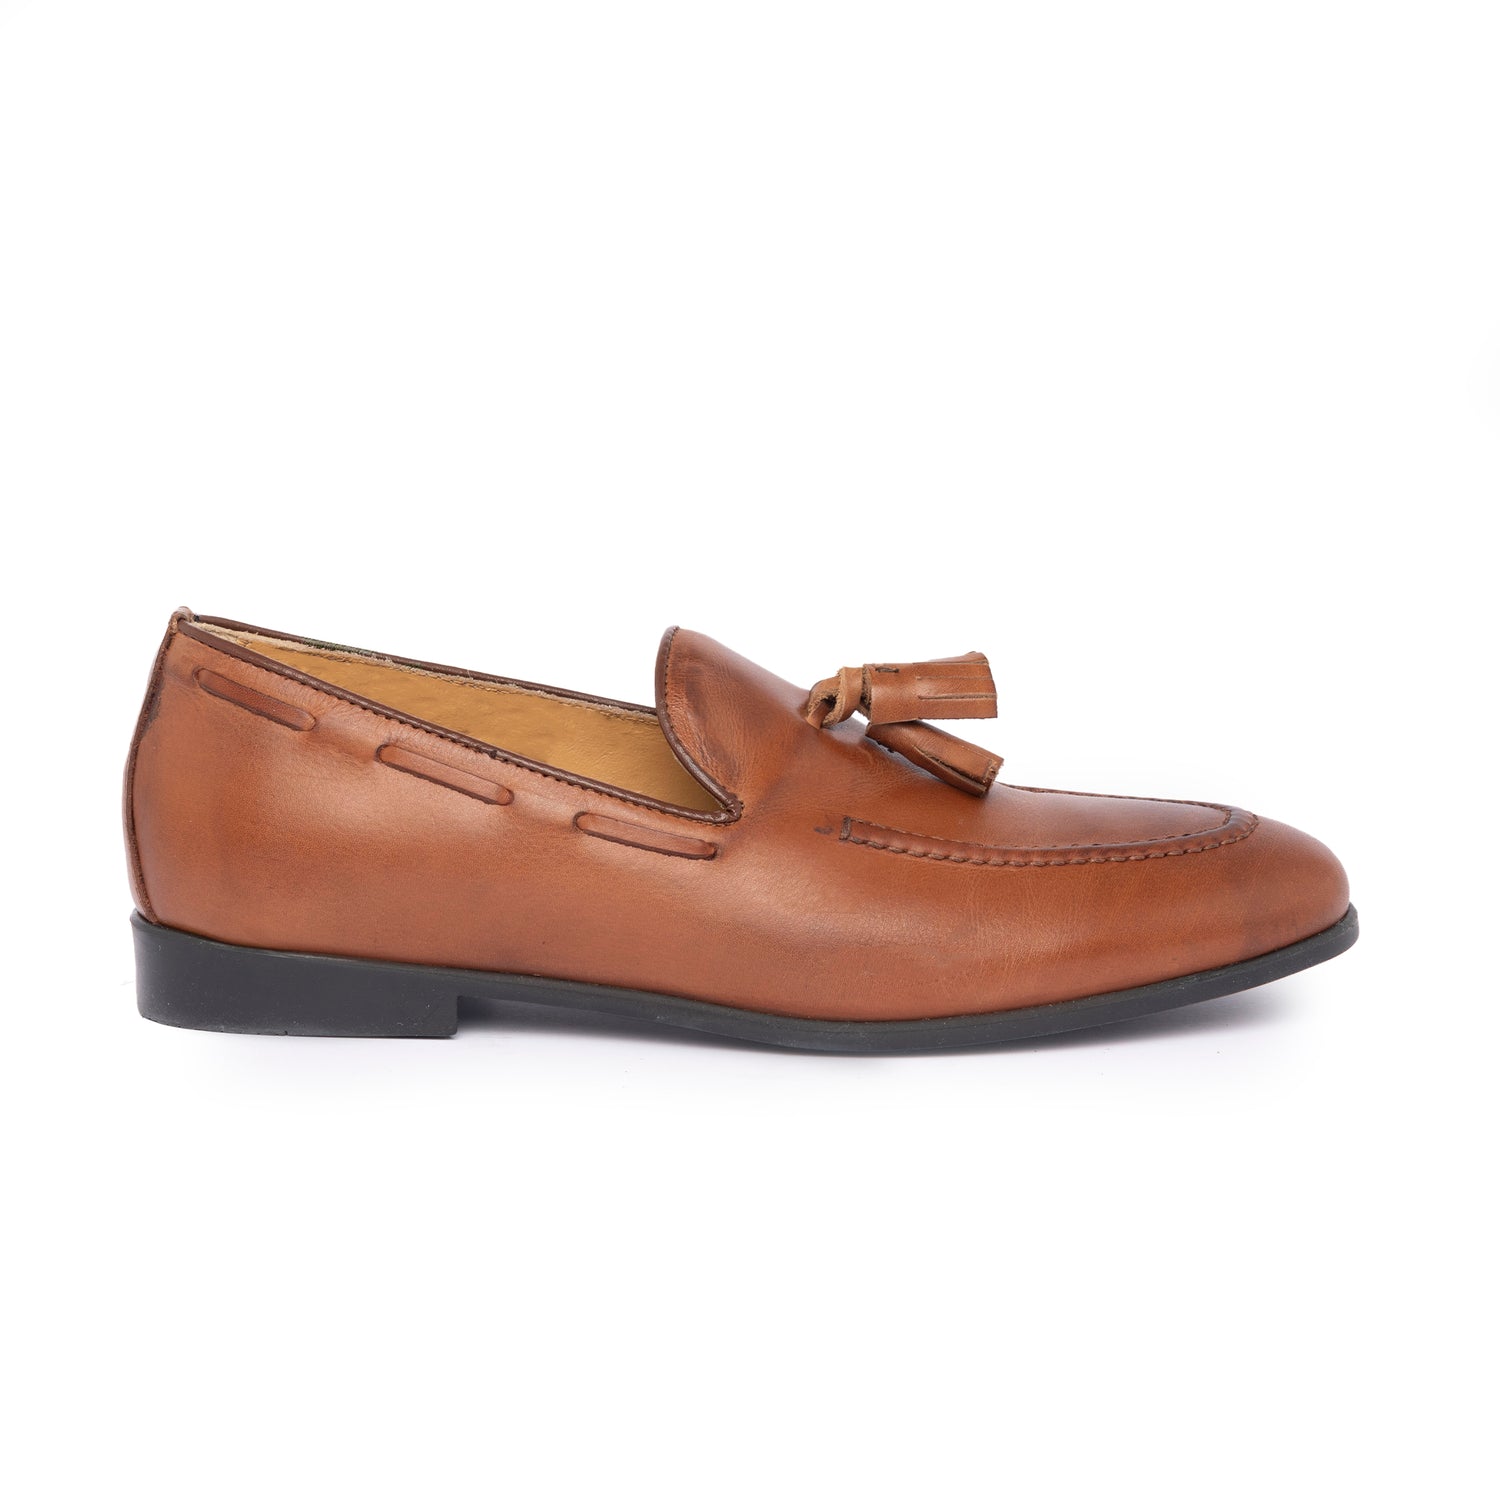 Leather loafers with bow - Tan